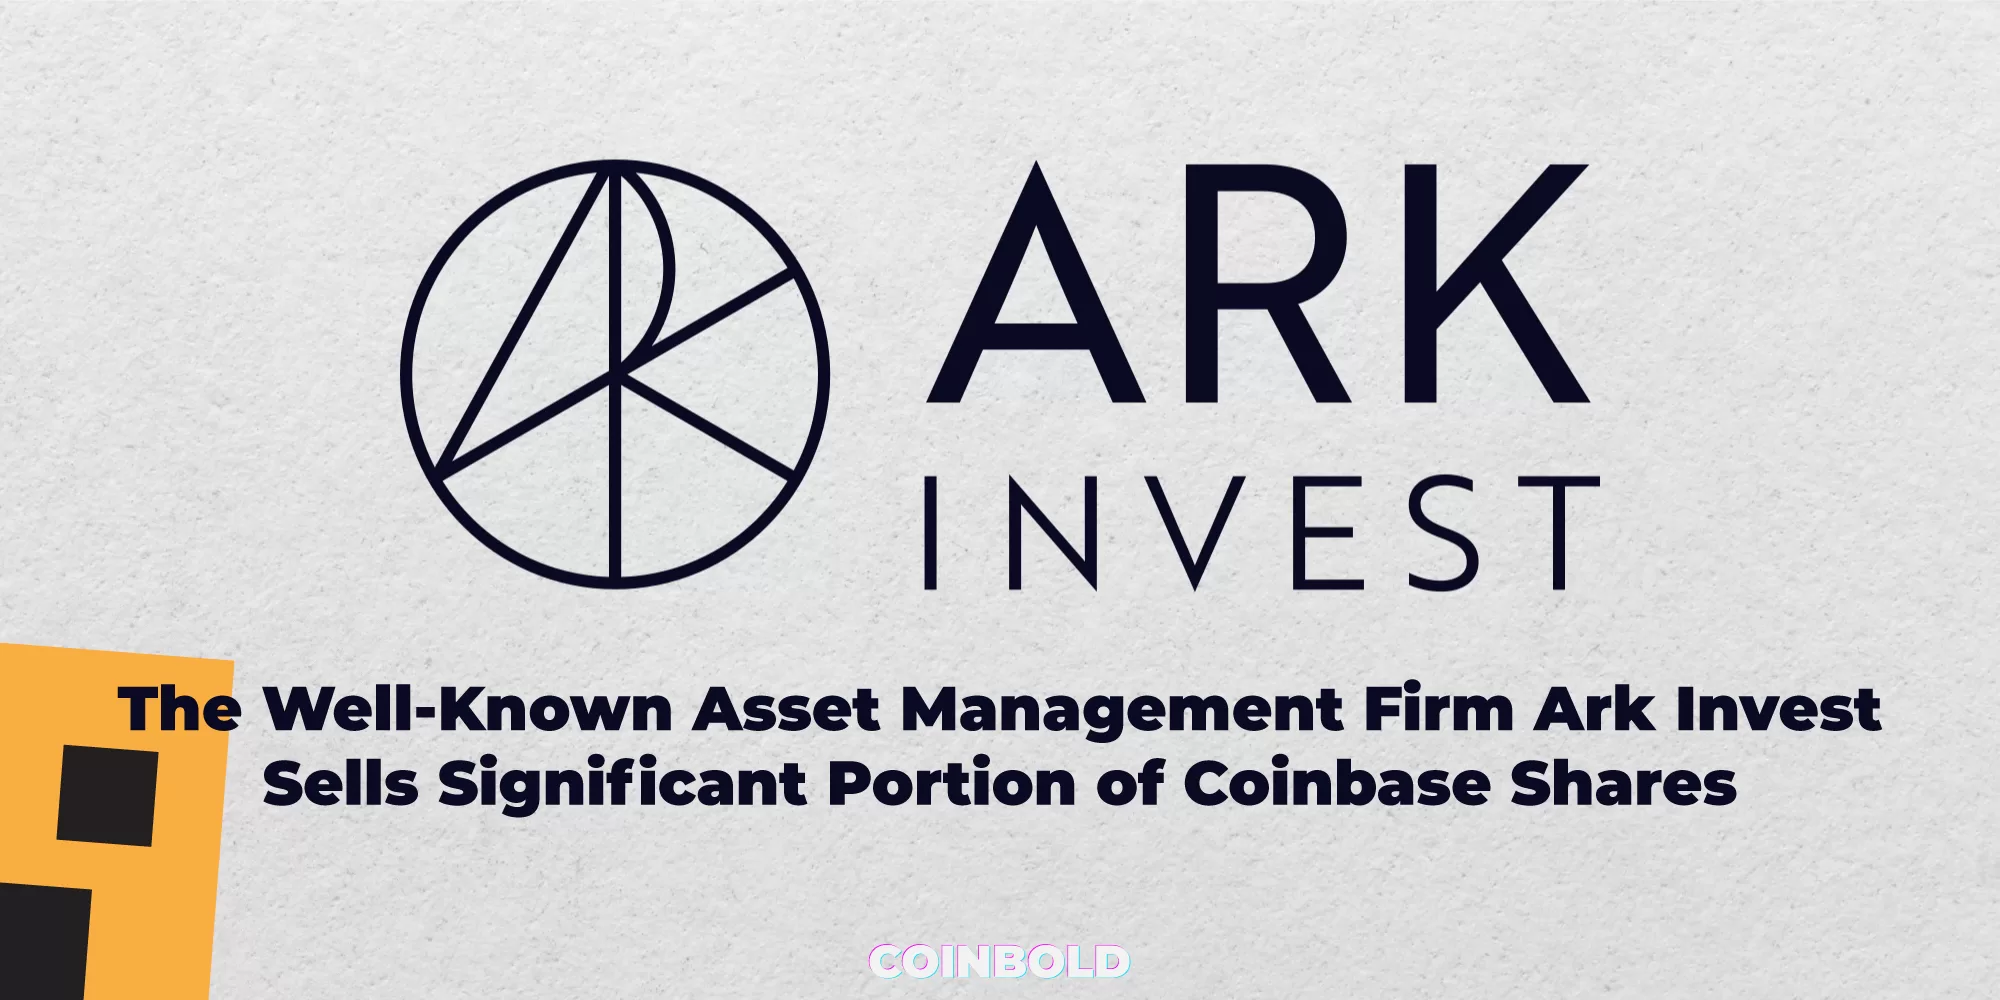 The Well-Known Asset Management Firm Ark Invest Sells Significant Portion of Coinbase Shares